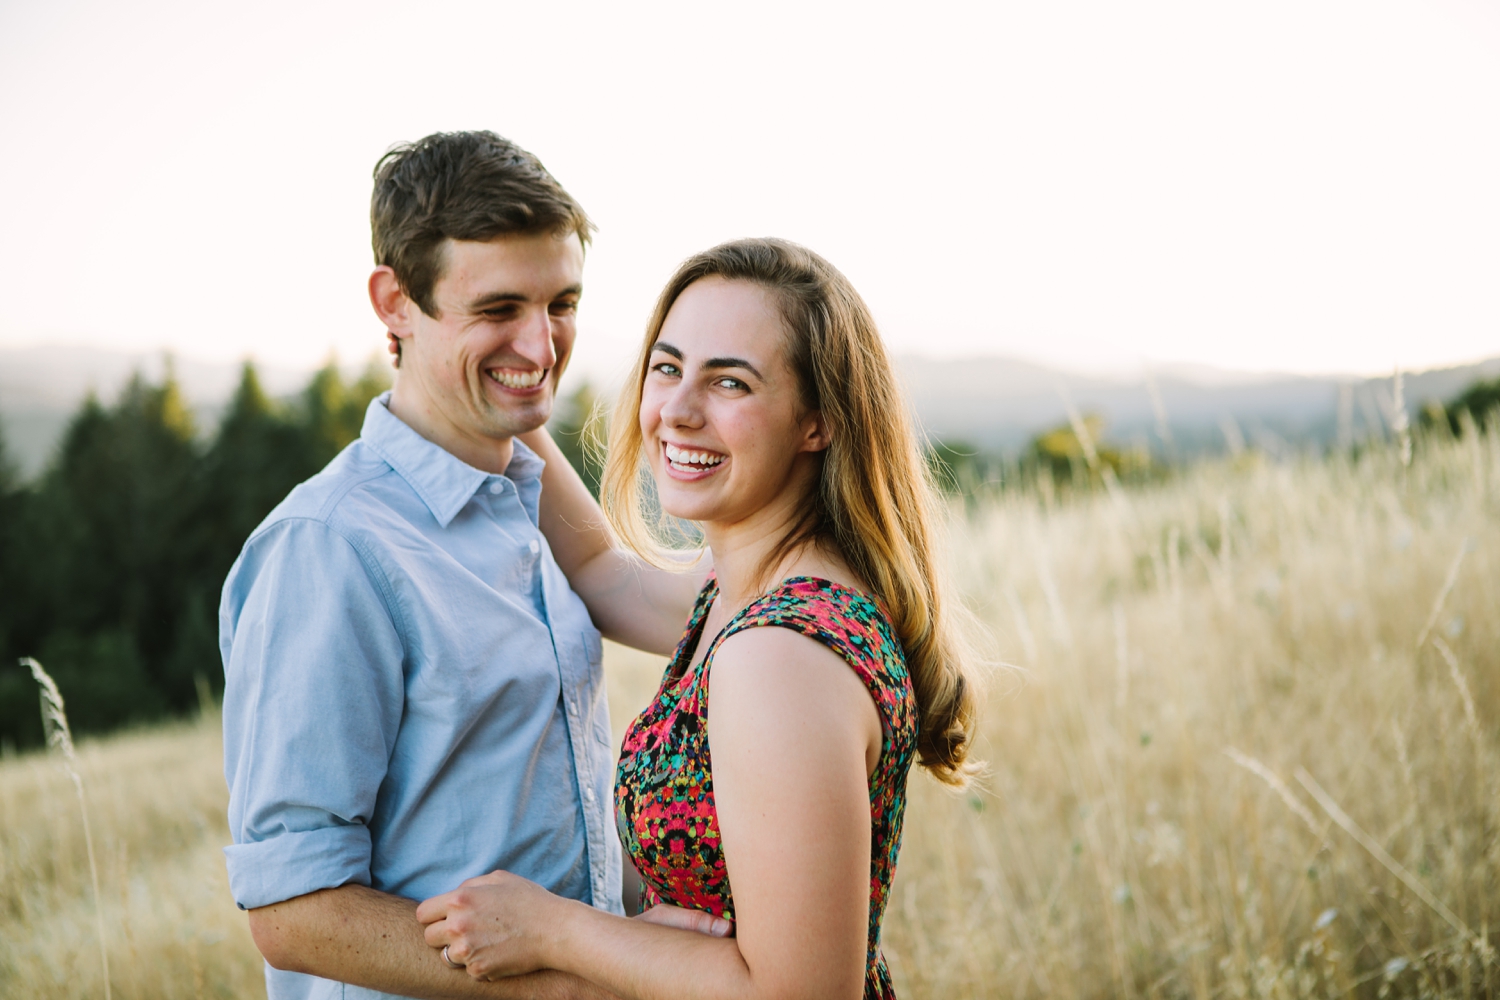 engagement portraits outdoors in corvallis oregon by Thistledown photography